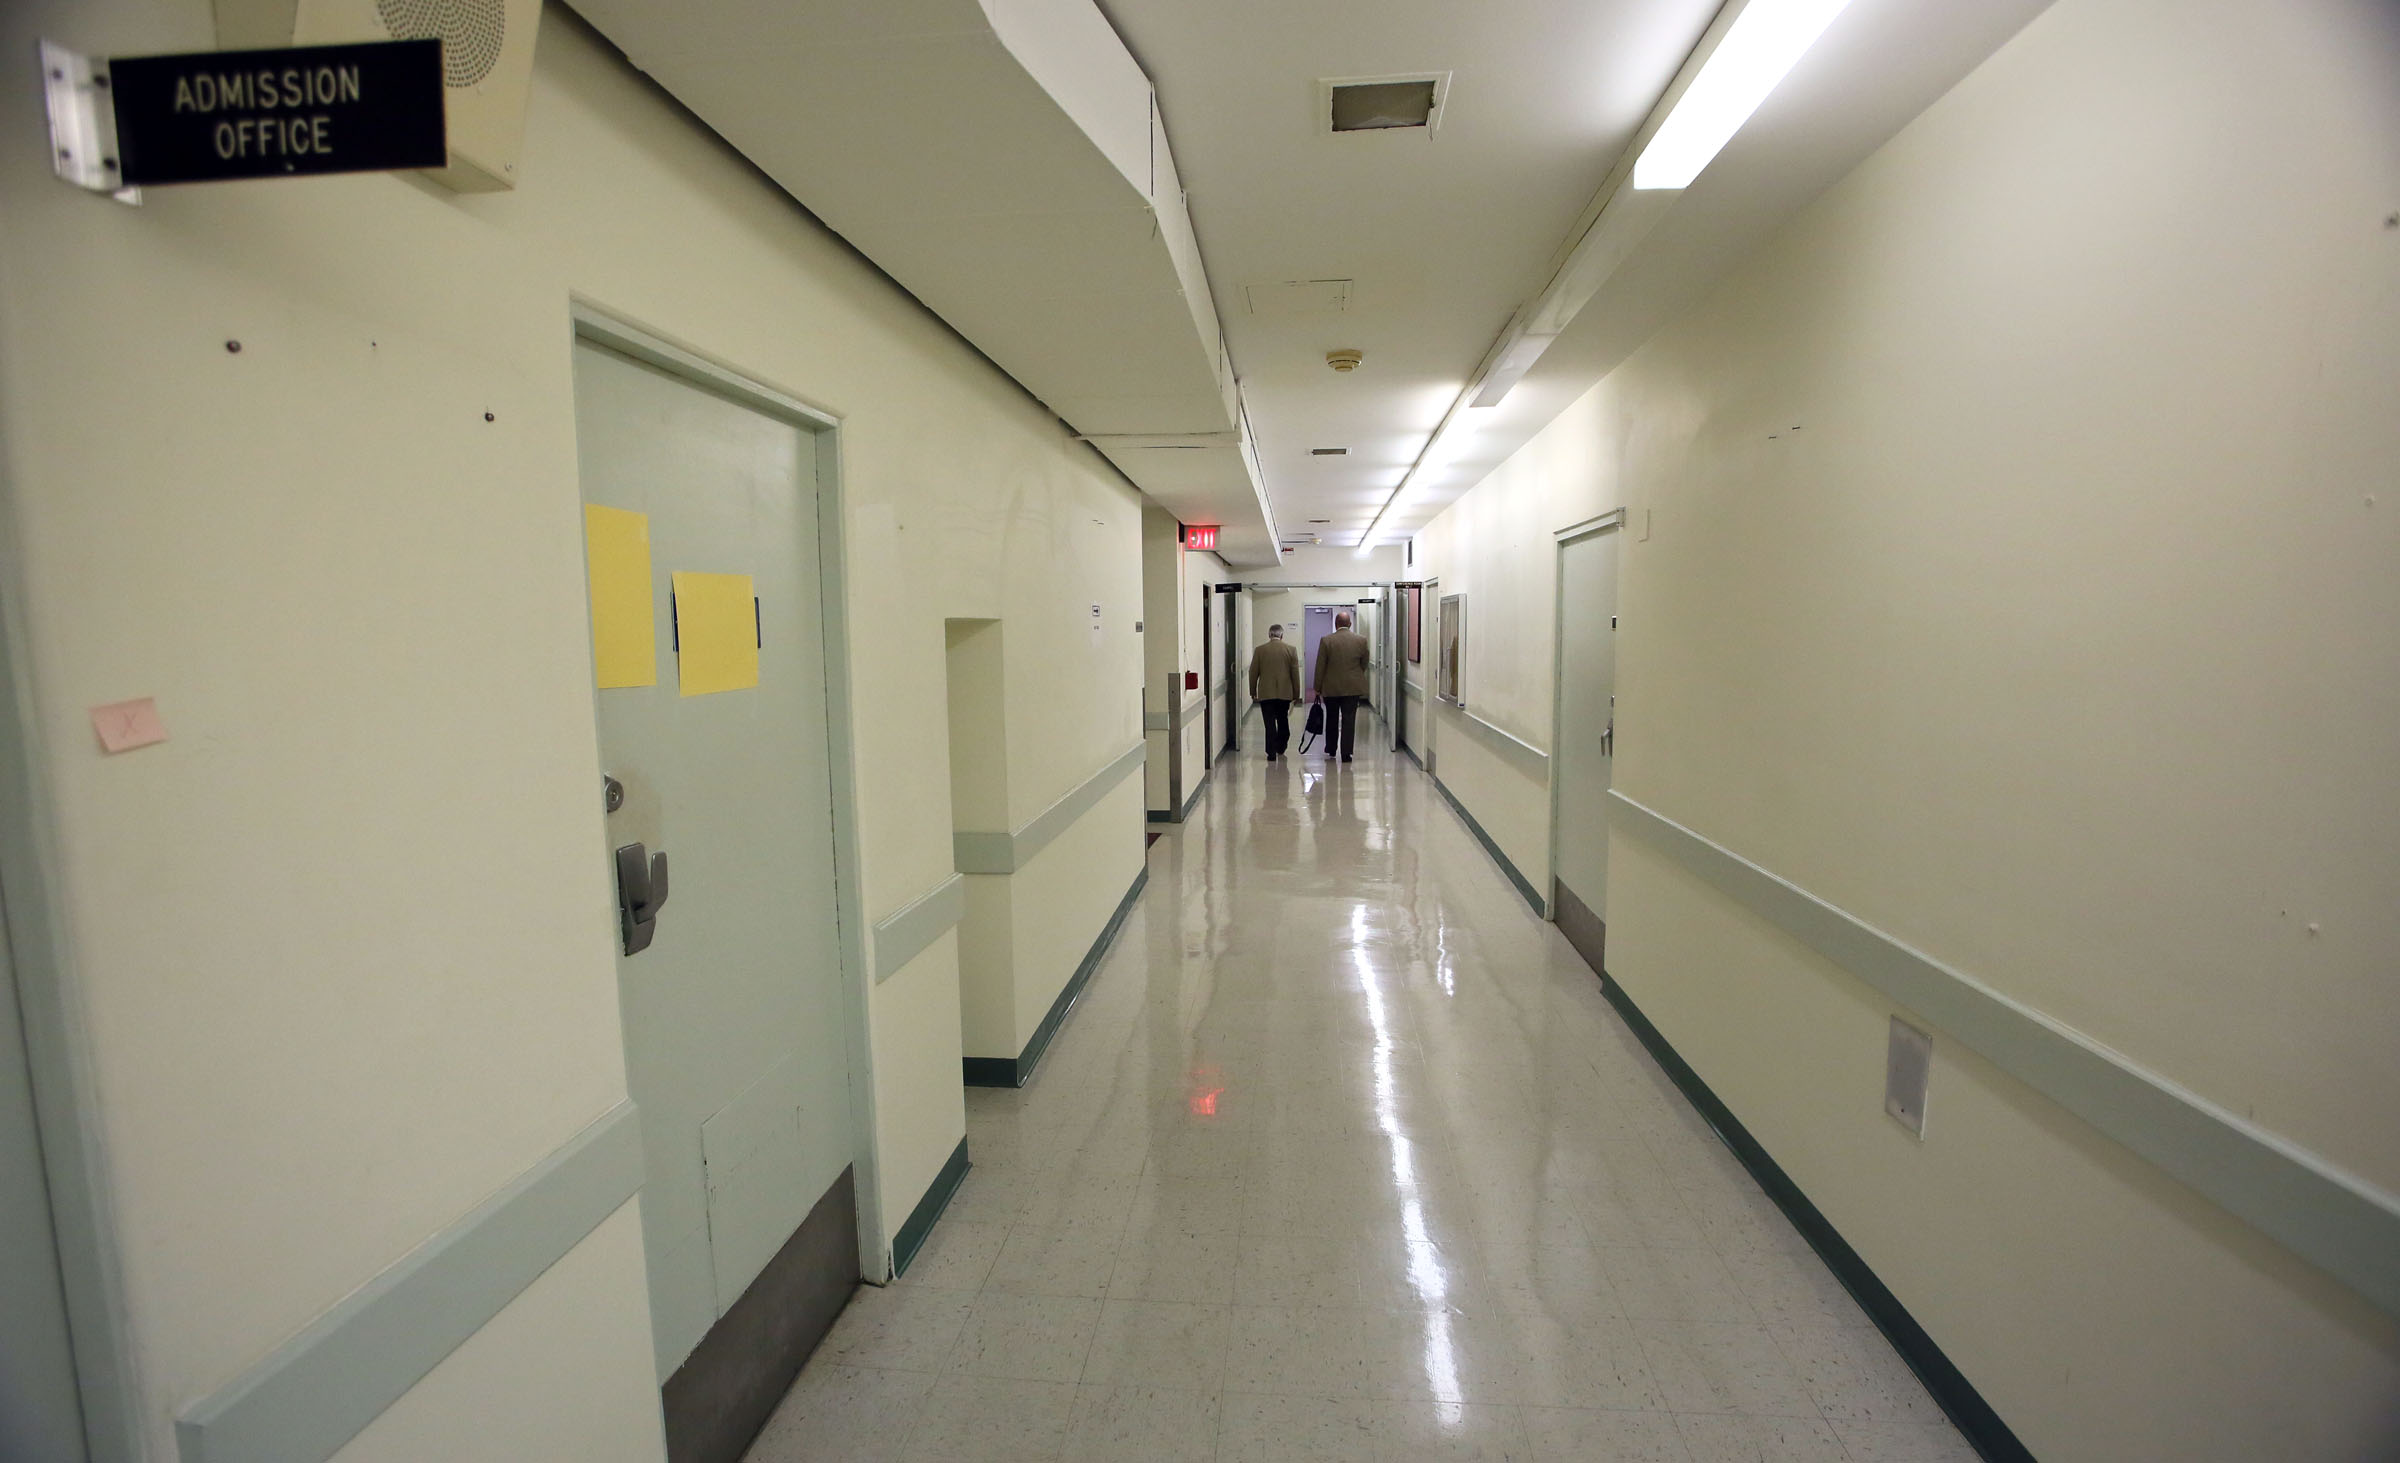 Inside the A.G. Holley State Hospital in Lantana as officials shut it down in October 2012. Despite a tuberculosis outbreak, state health officials pushed up the hospital’s sale date as part of cost cutting efforts.